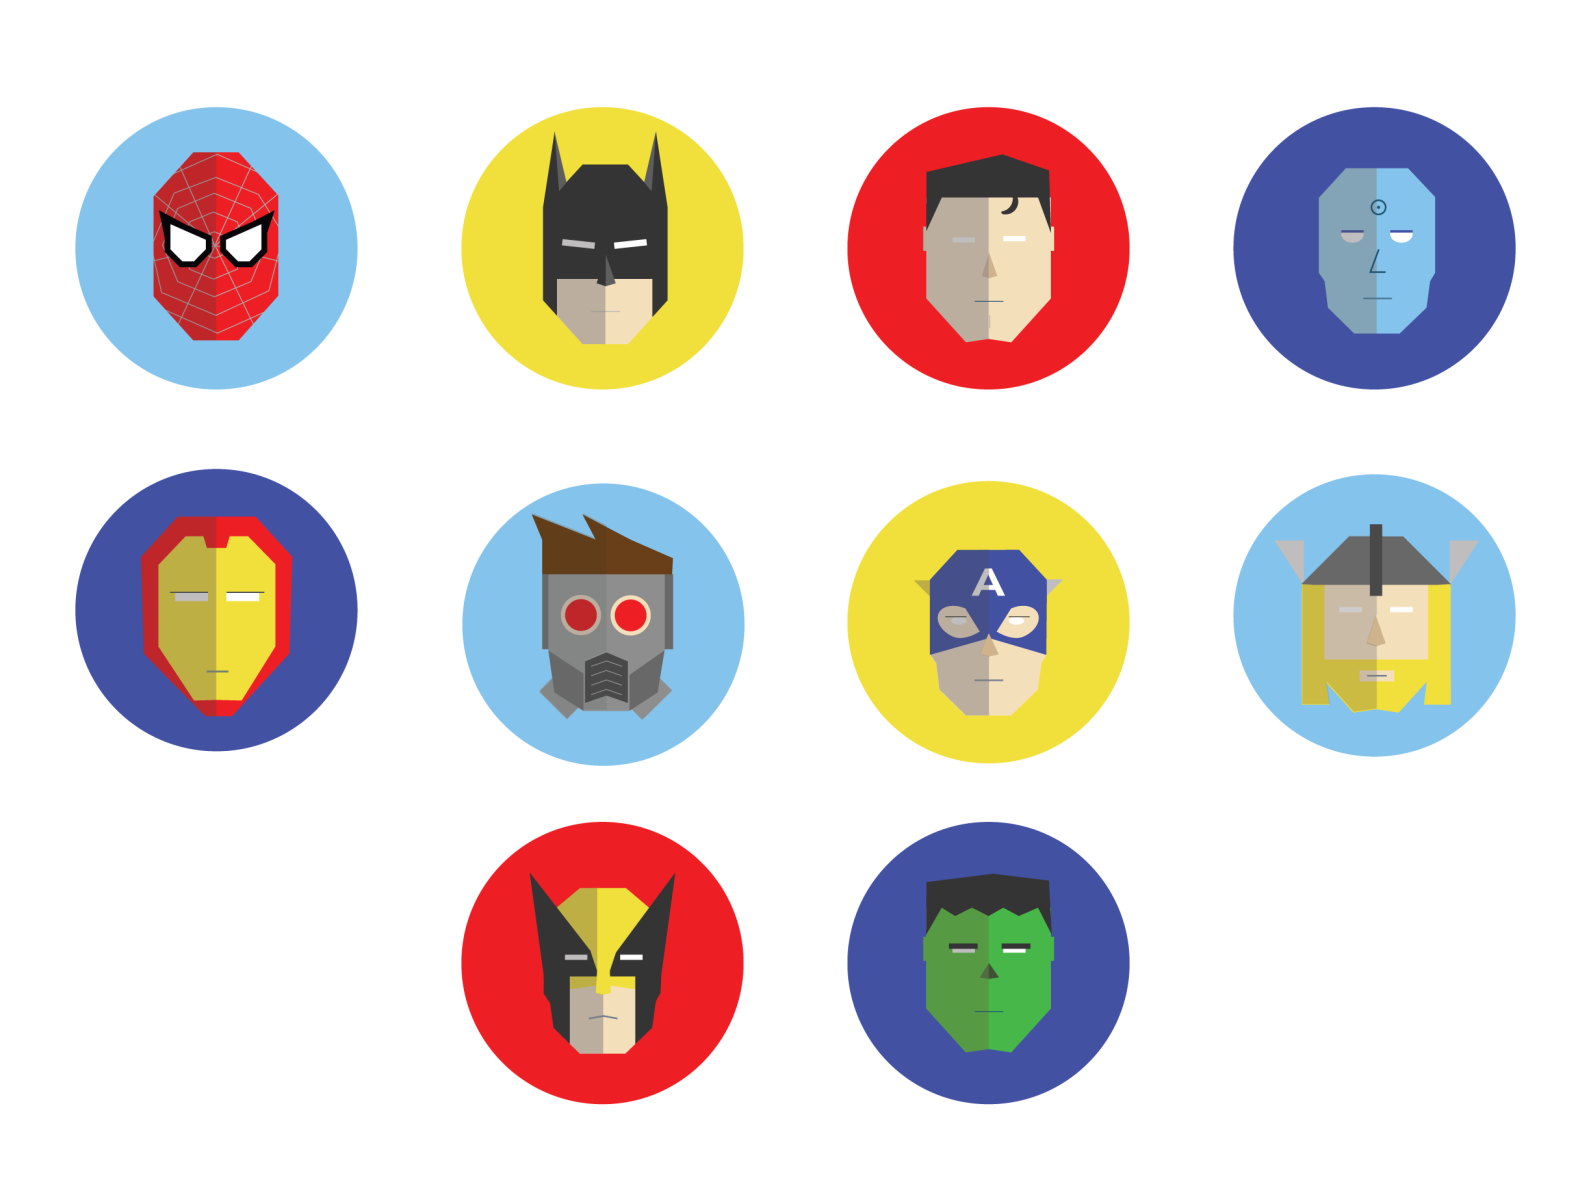 Bechdel Superheroes by Ryan Linstrom on Dribbble